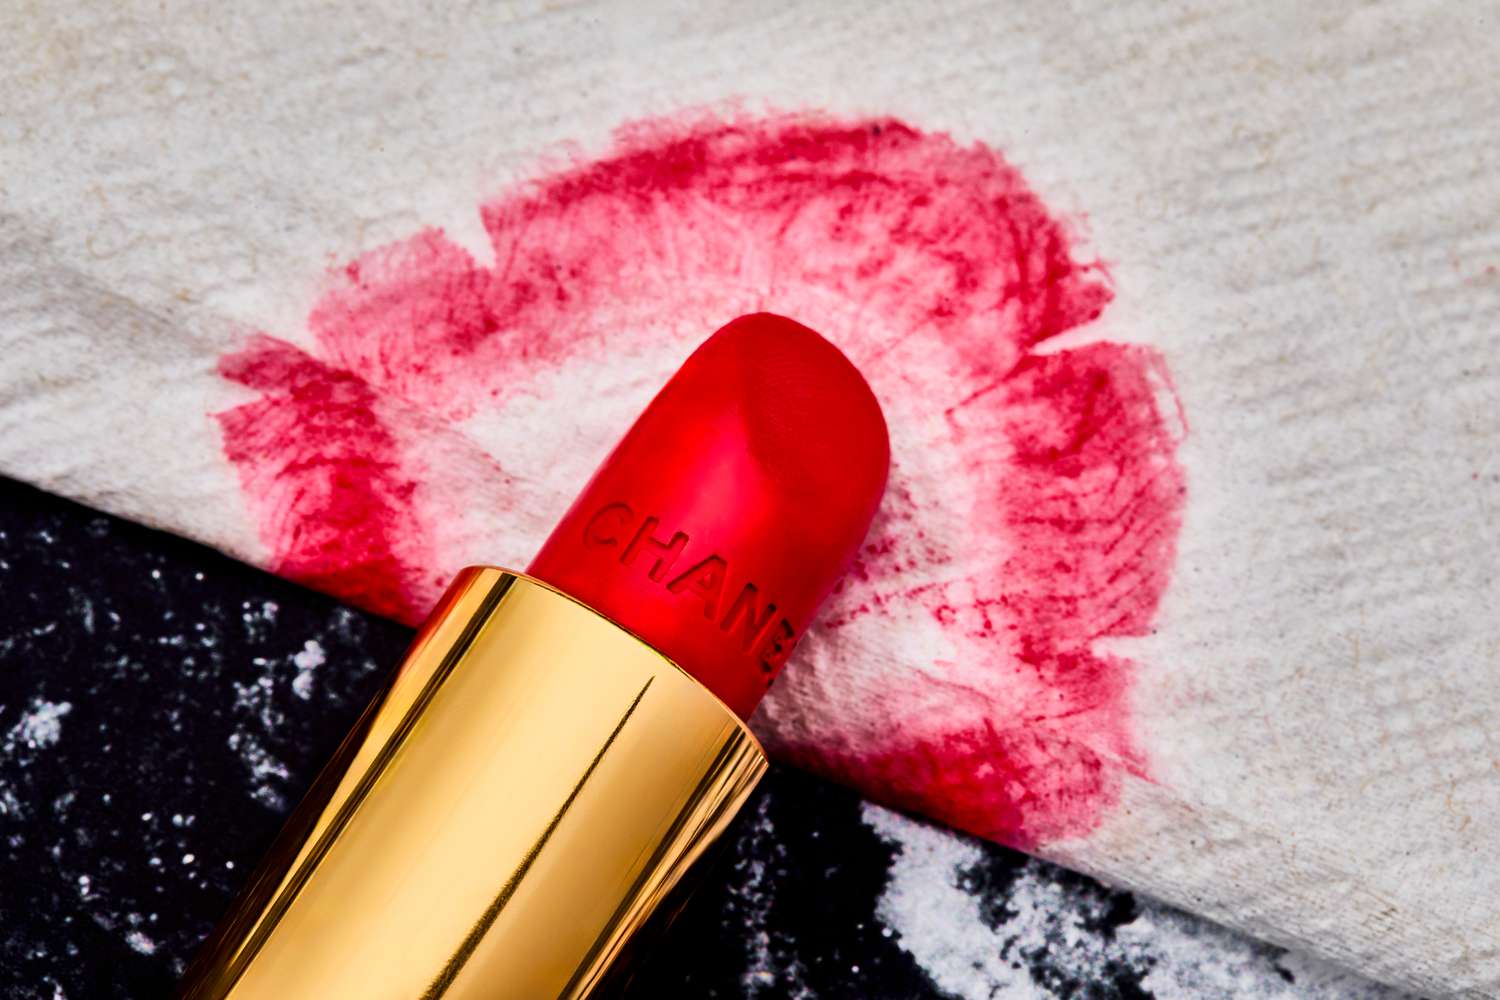 A close up of the Chanel lipstick and a smear on a napkin